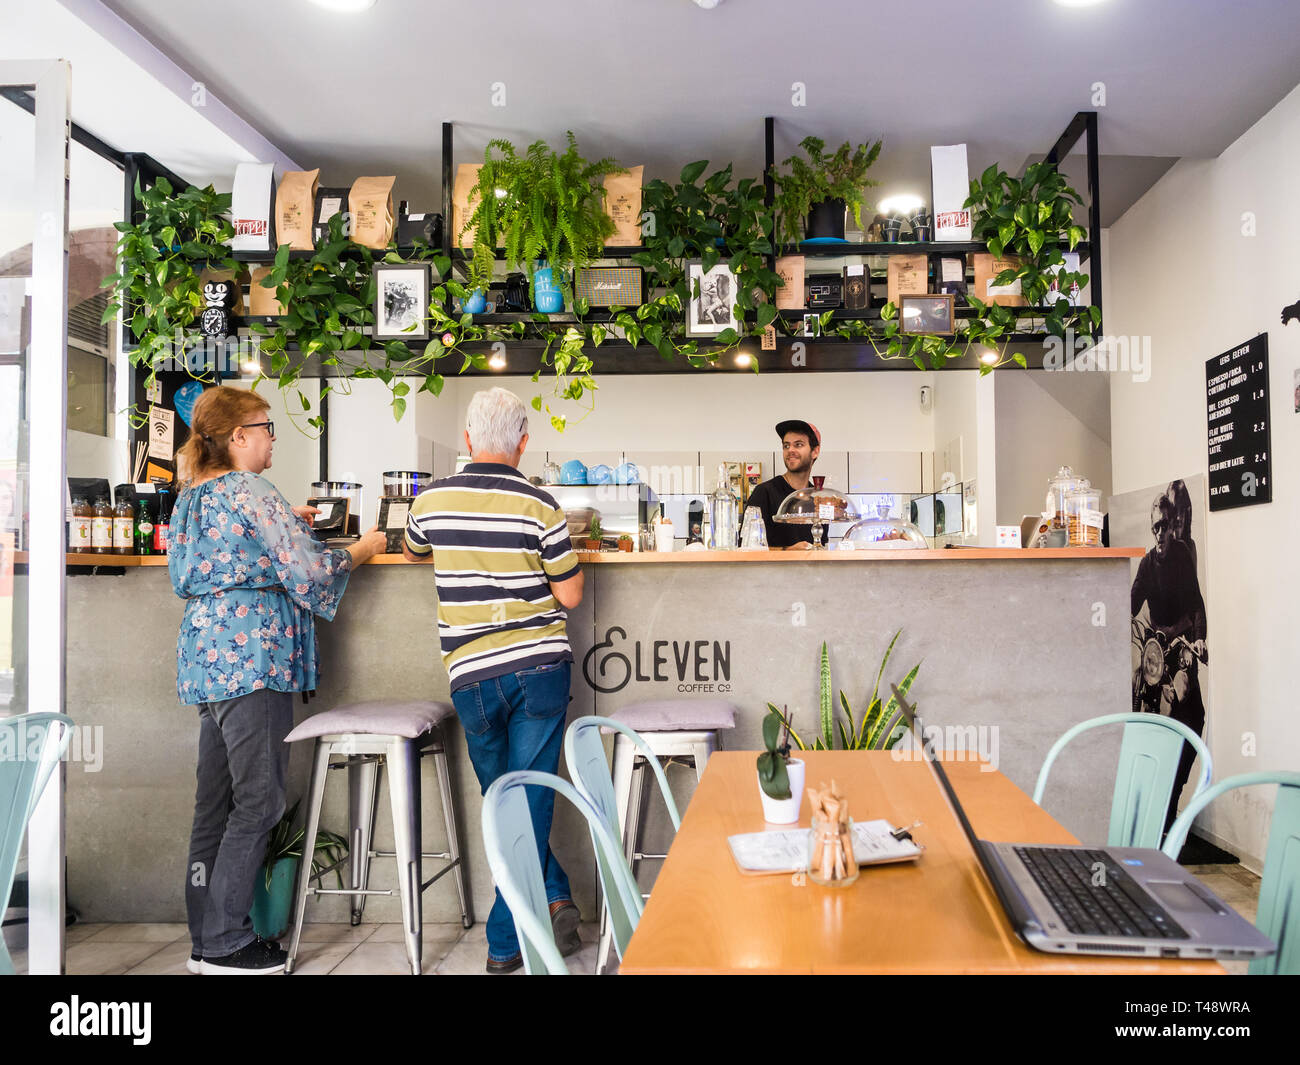 Madeira, Portugal - October 31, 2018: People at Legs Eleven coffee shop  in Funchal, the capital of Madeira, Portugal Stock Photo